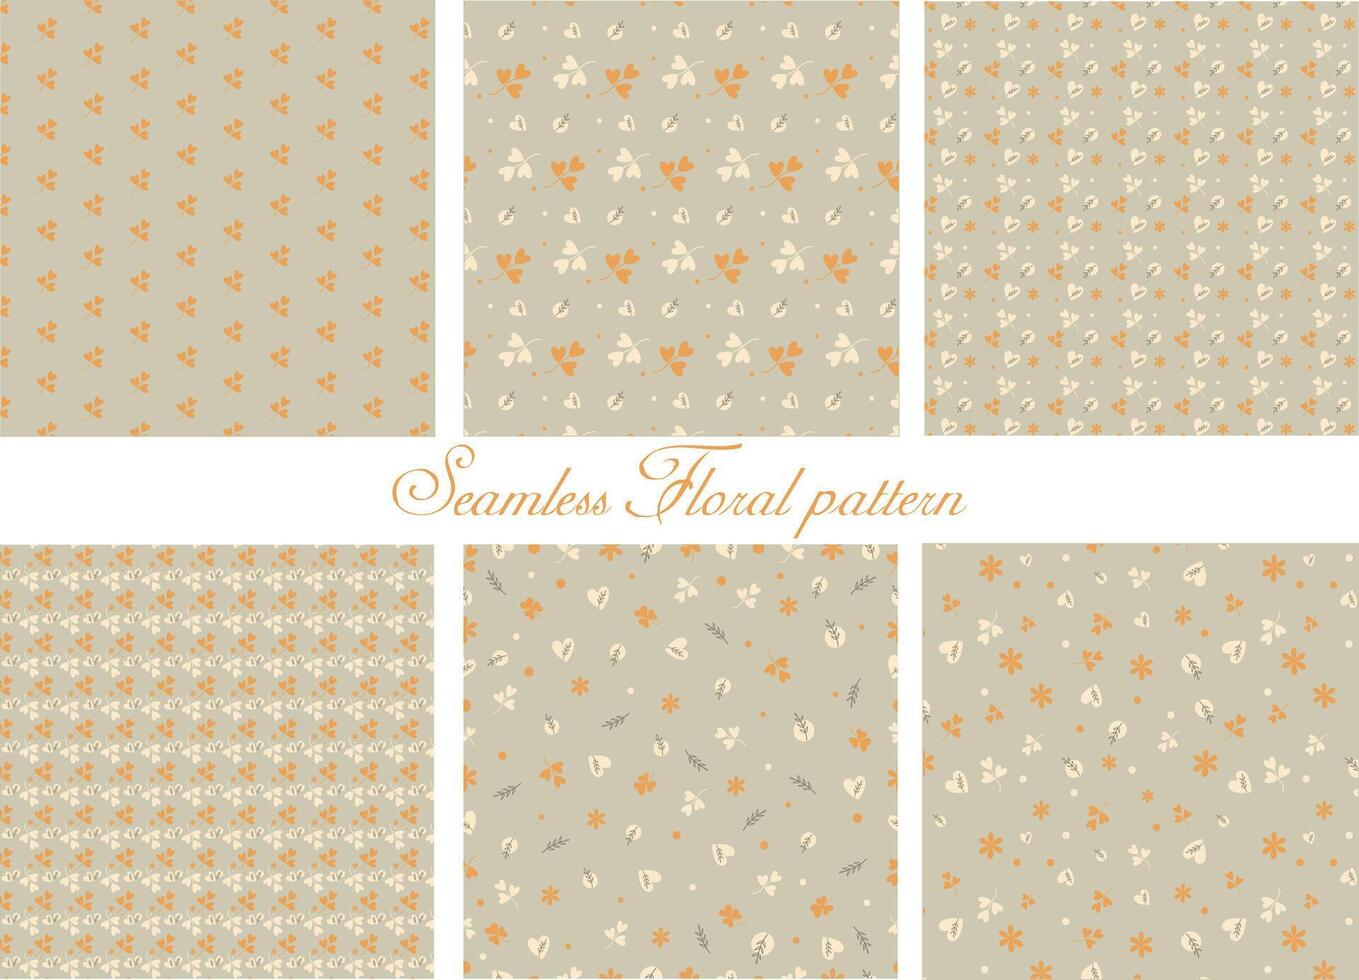 Seamless Monochrome Floral Backdrop Pattern With Hand Drawn Illustration of Flowers and Leaves In Retro Graceful Style. Illustration On Isolated Background. vector